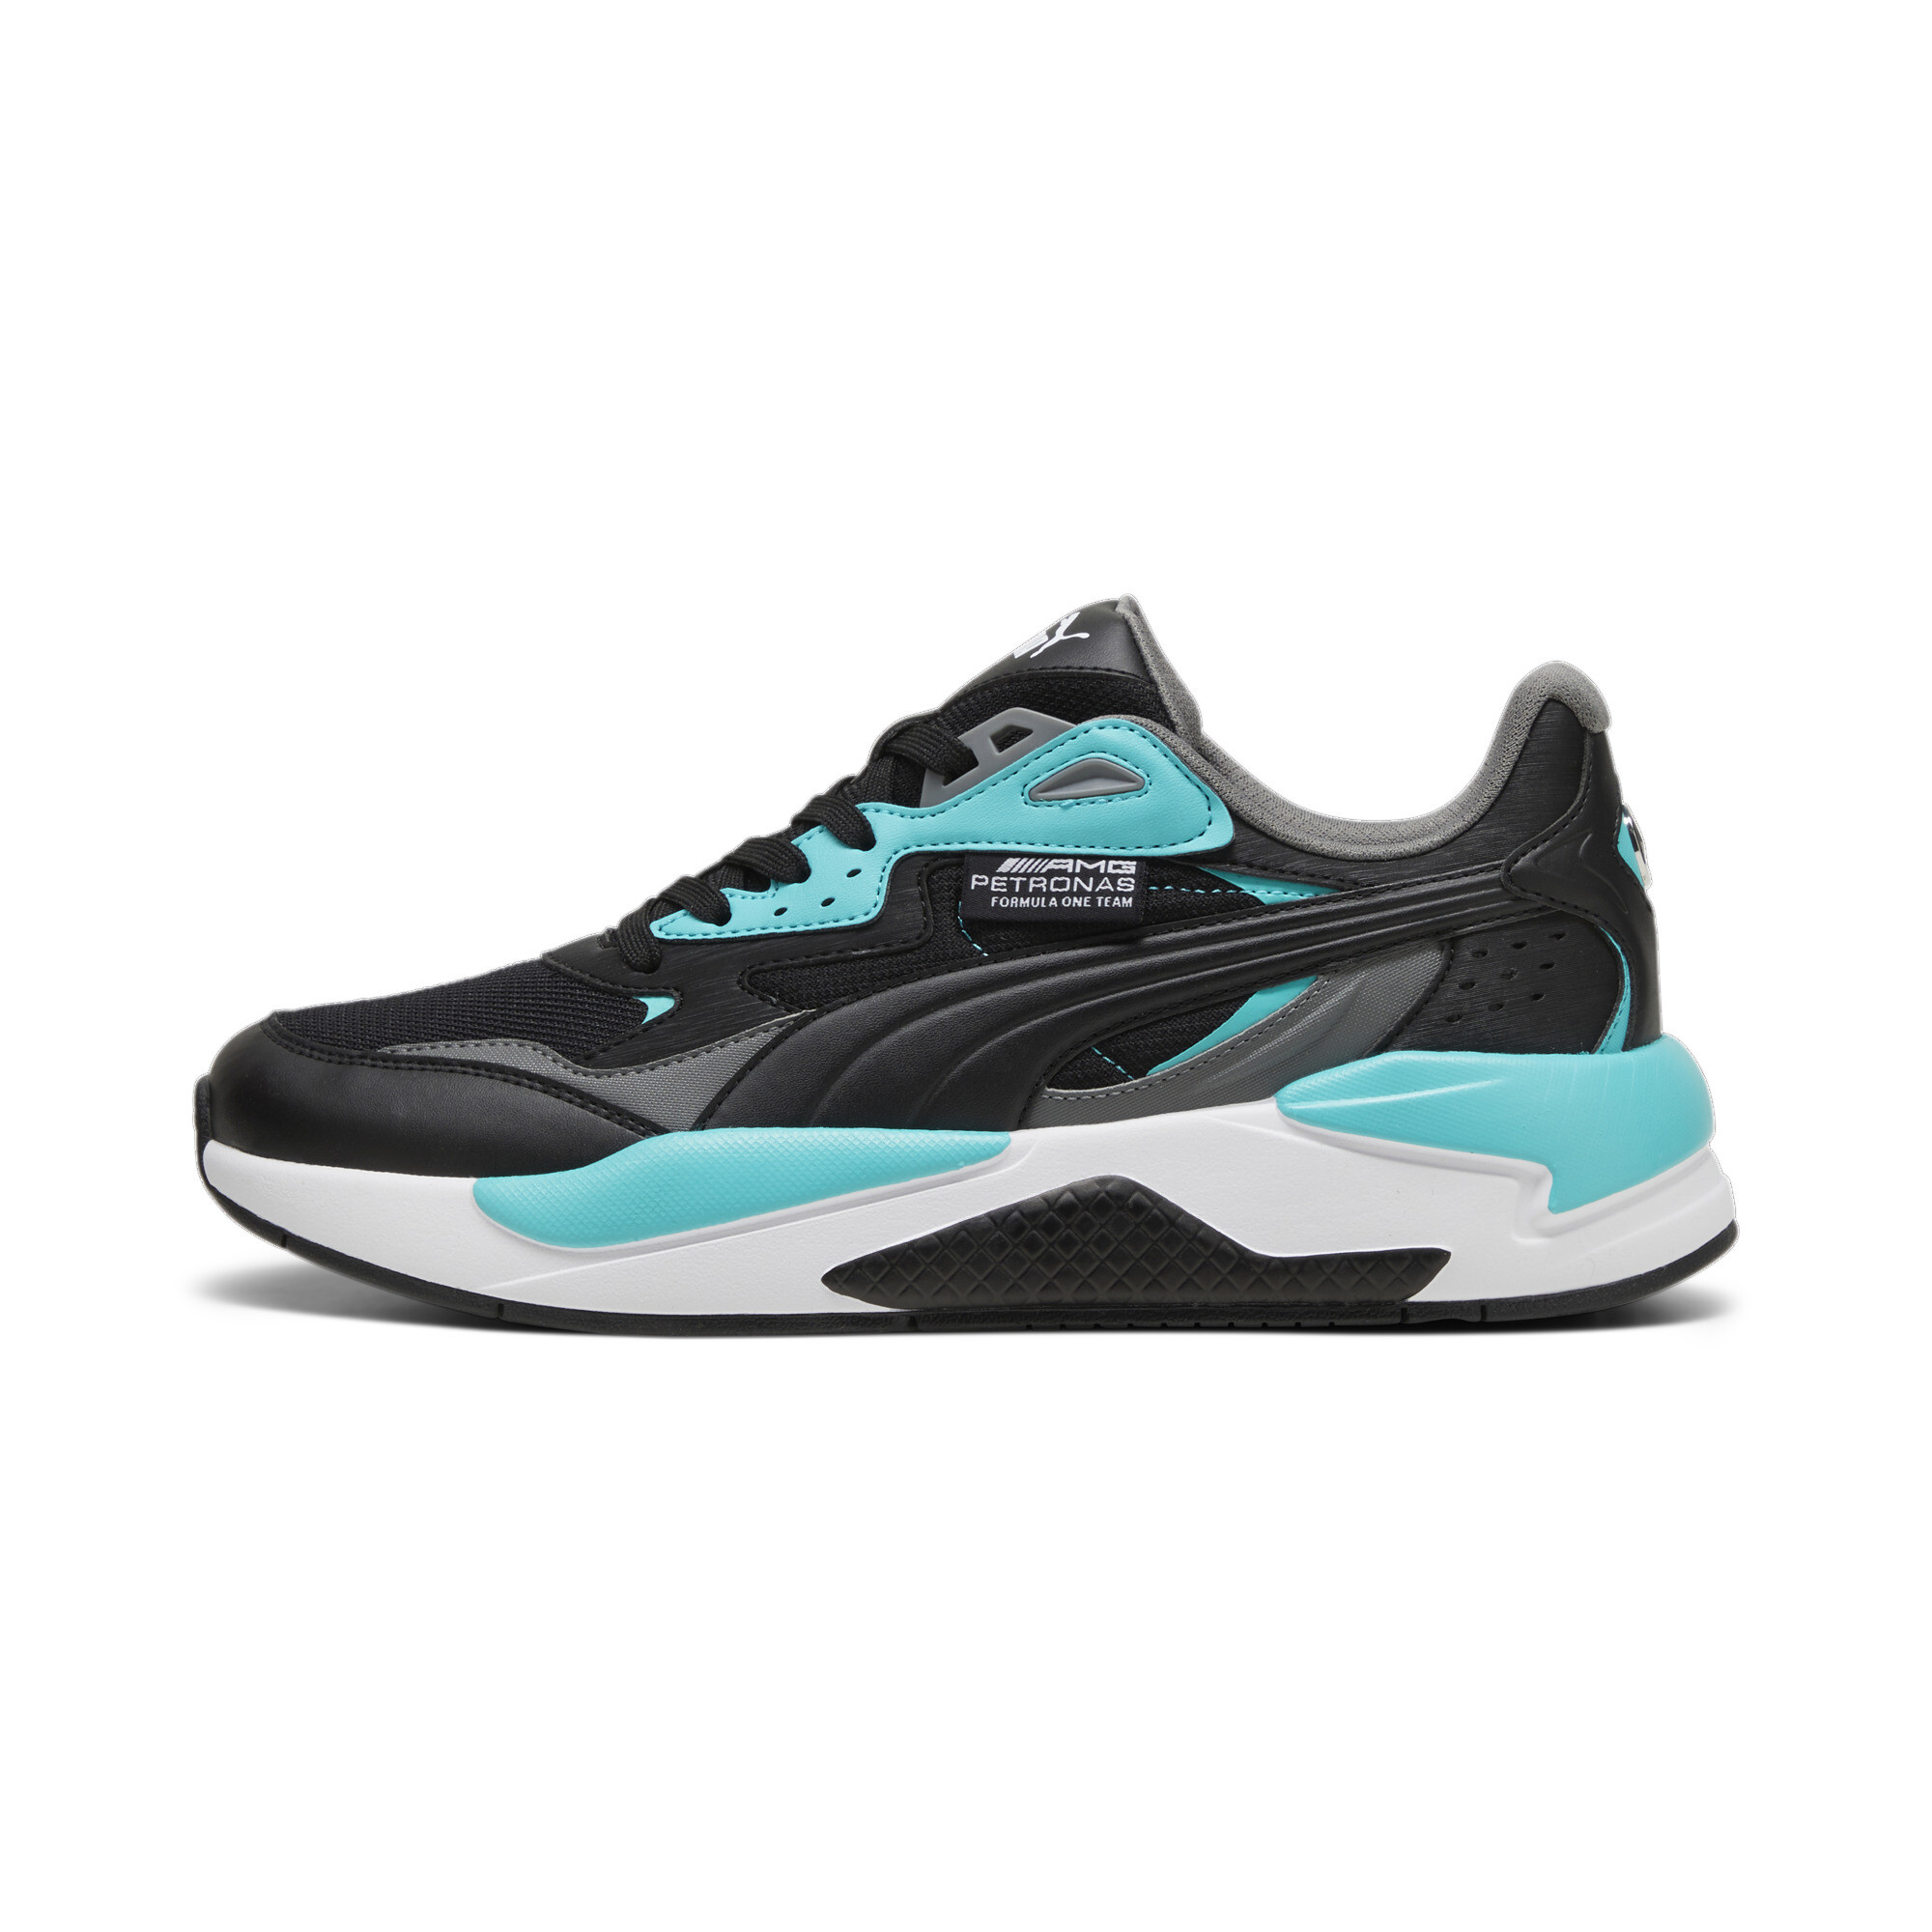 Puma Mercedes F1 X-Ray Speed Motorsport Shoes, Black, Size 37.5, Shoes